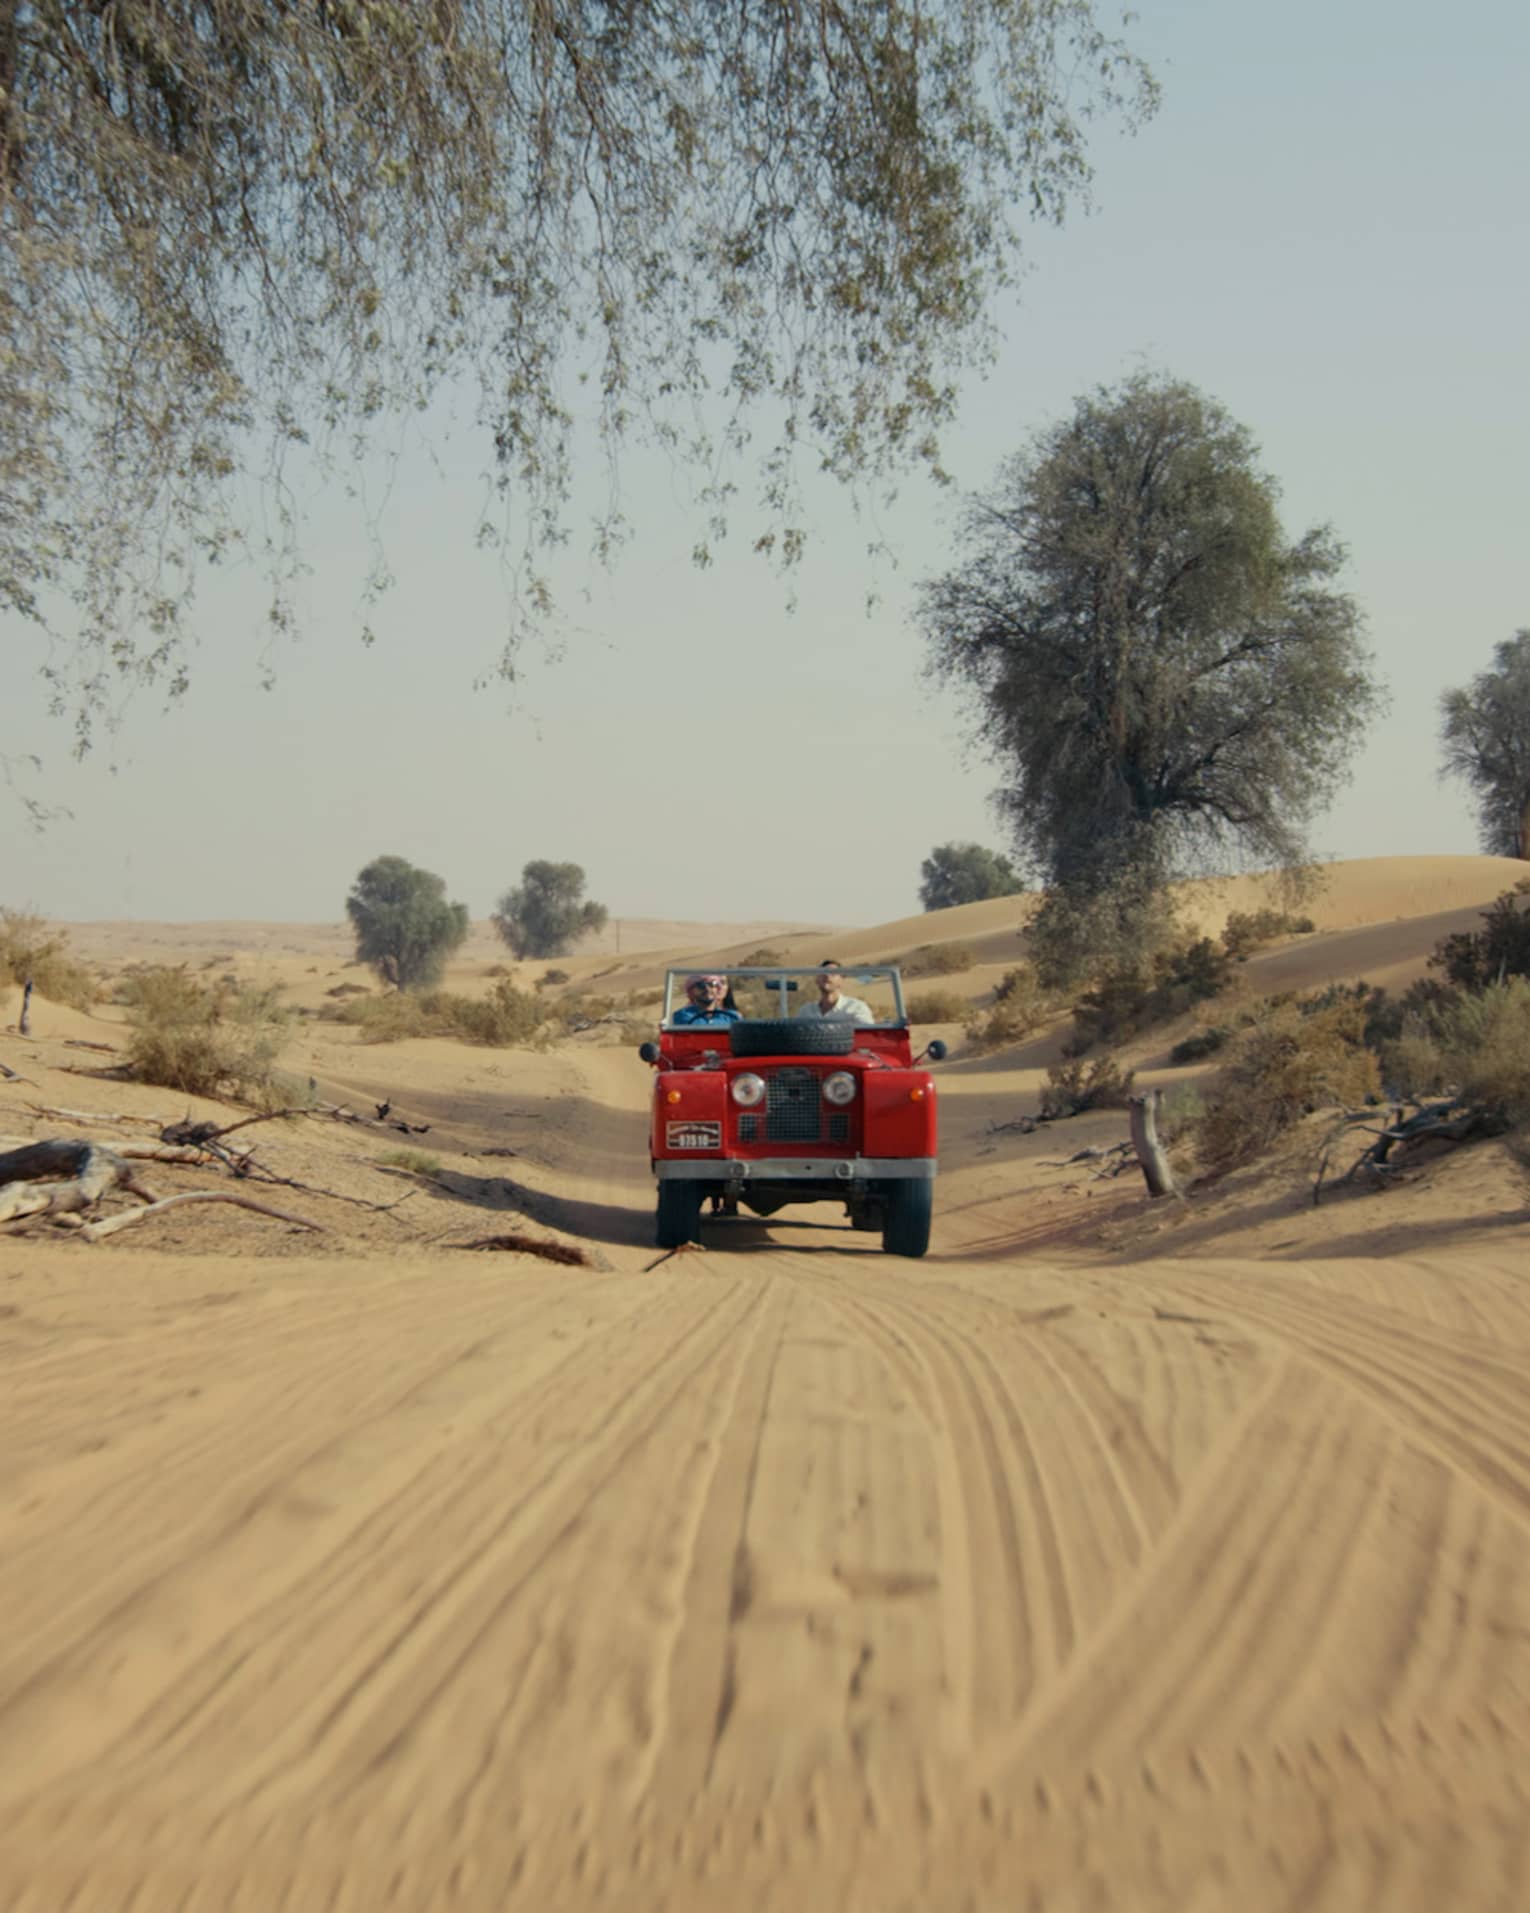 A faraway view of a red Range Rover in a dusty brown desert beneath a scrawny tree.